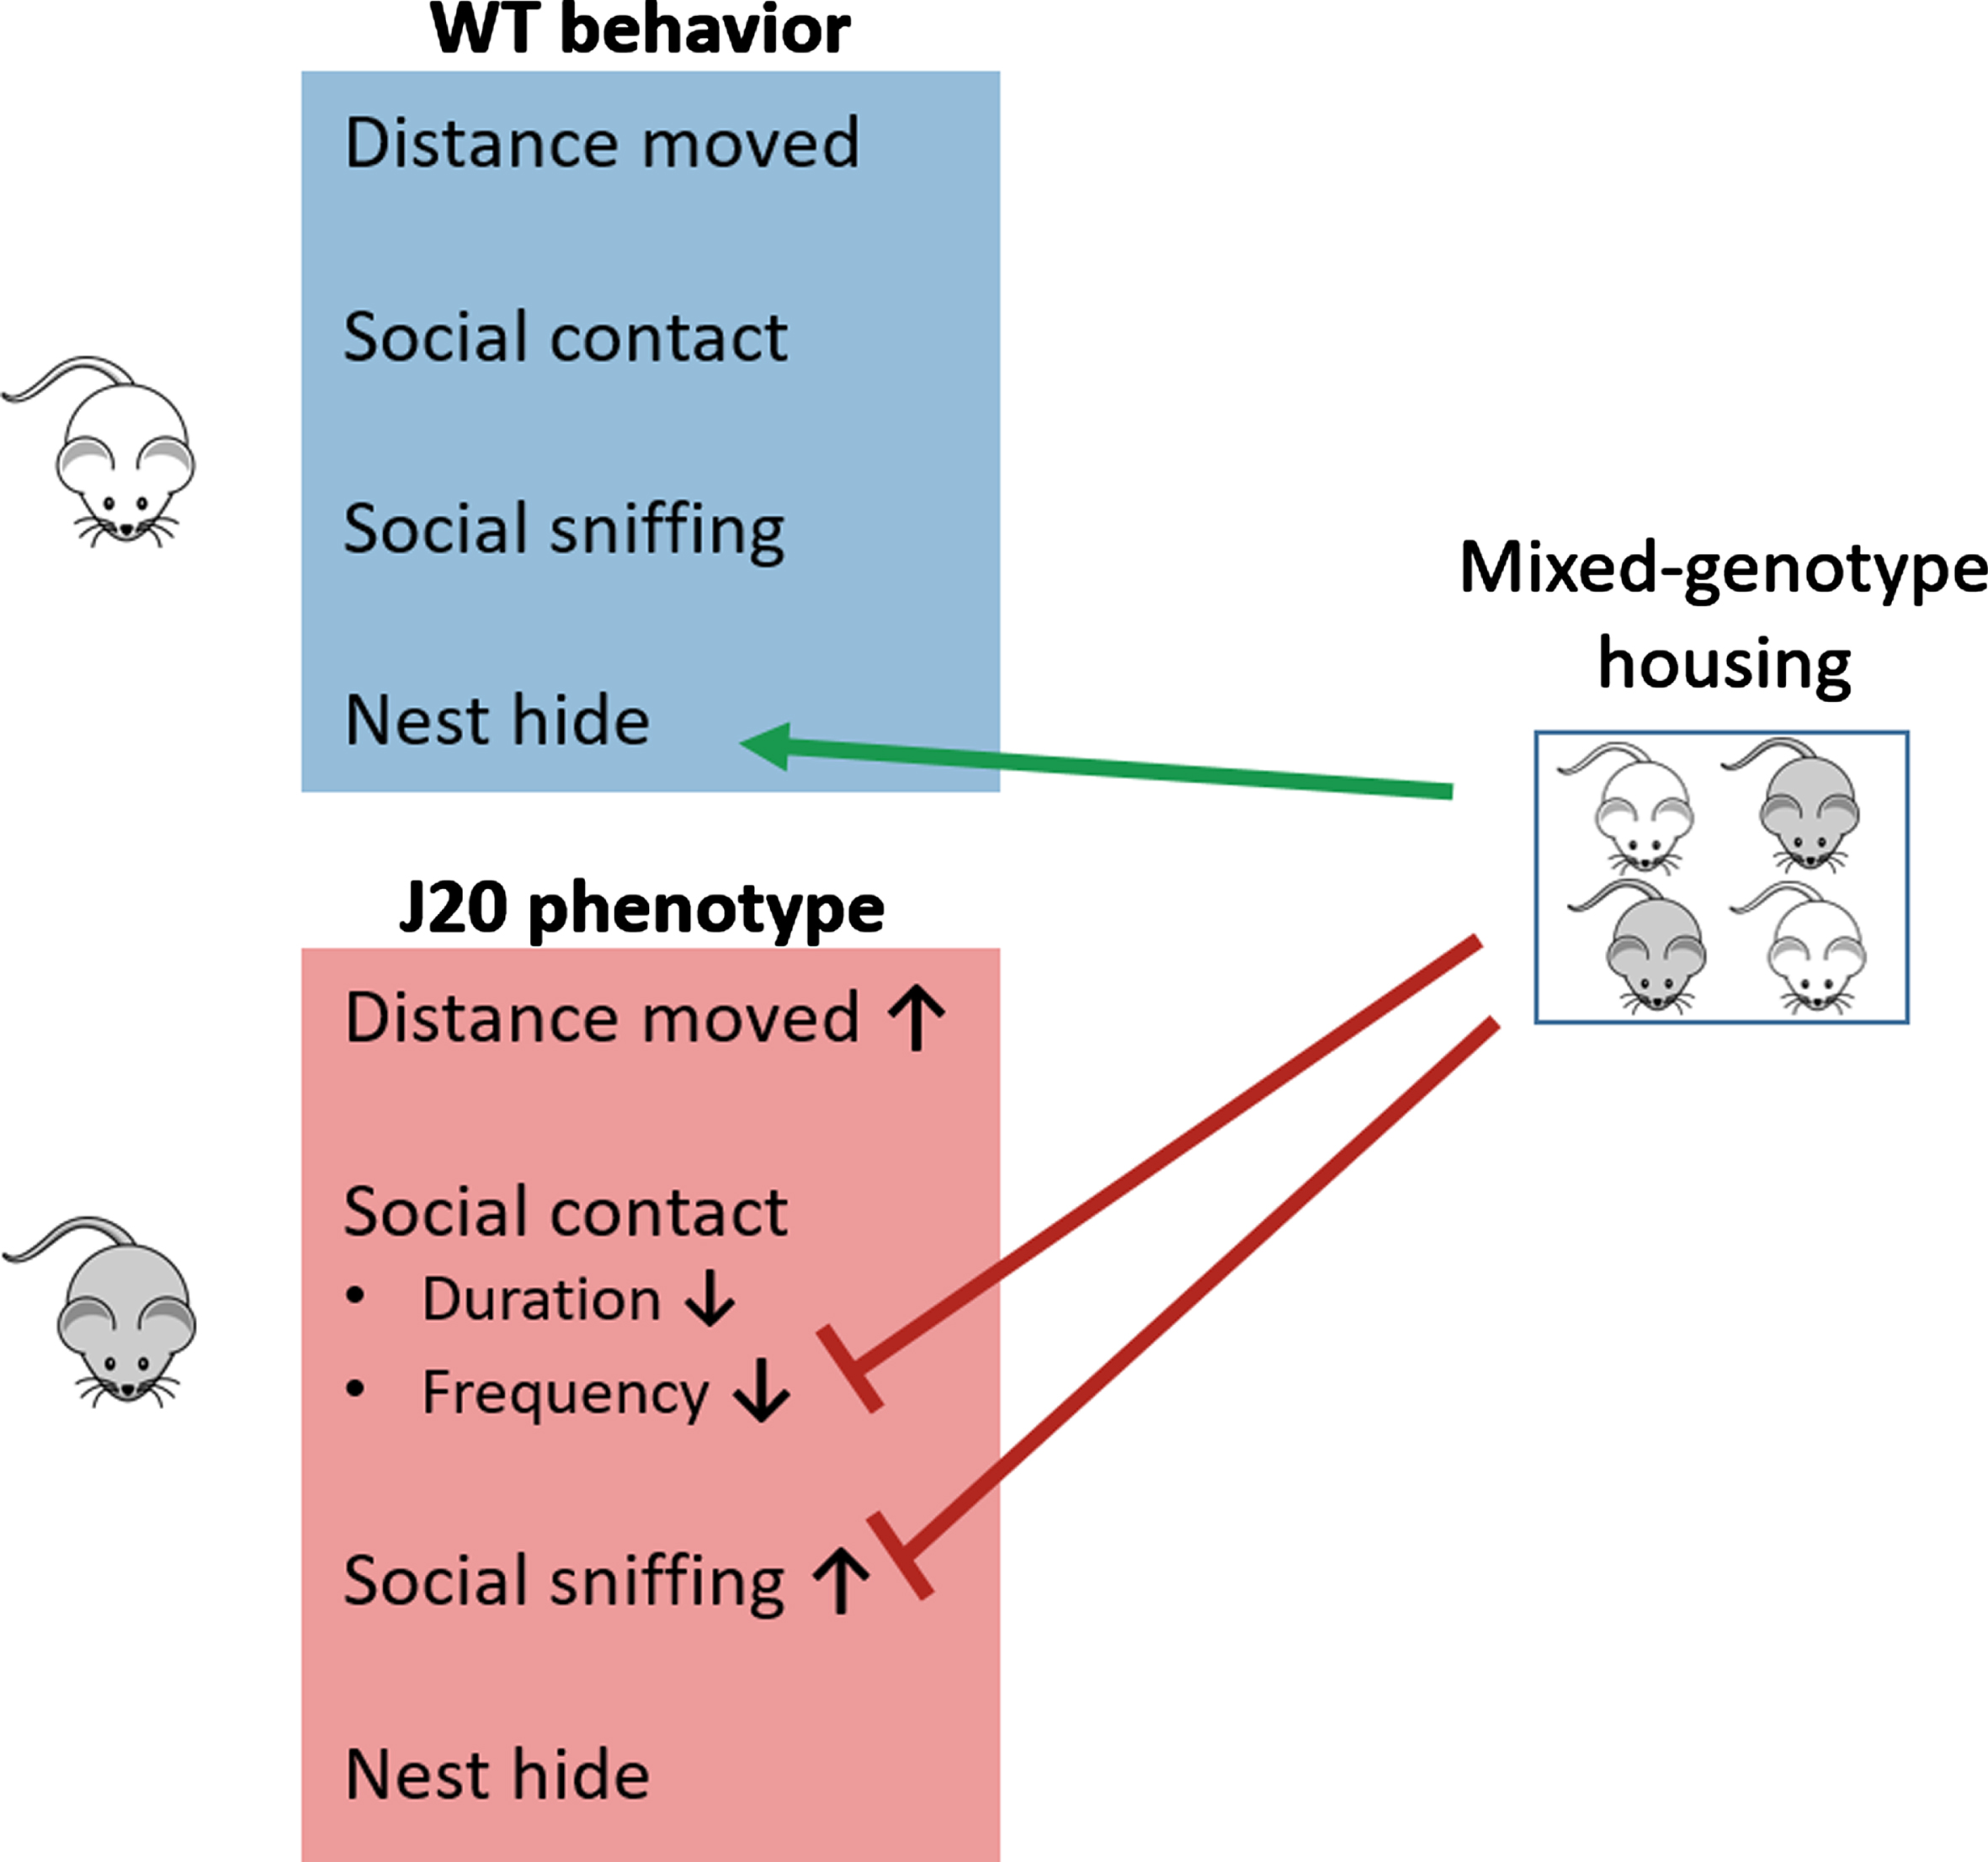 Visual summary of the results. In contrast to WTsame mice, the J20 phenotype encompasses increased distance moved, reduced social contact duration and frequency, and increased social sniffing duration. Mixed-genotype housing increased nest hide of WT mice, increased the social contact frequency of J20 mice and reduced the social sniffing phenotype of J20 mice to a level that their sniffing duration is lower compared to J20same mice and similar to that of WTmix mice.